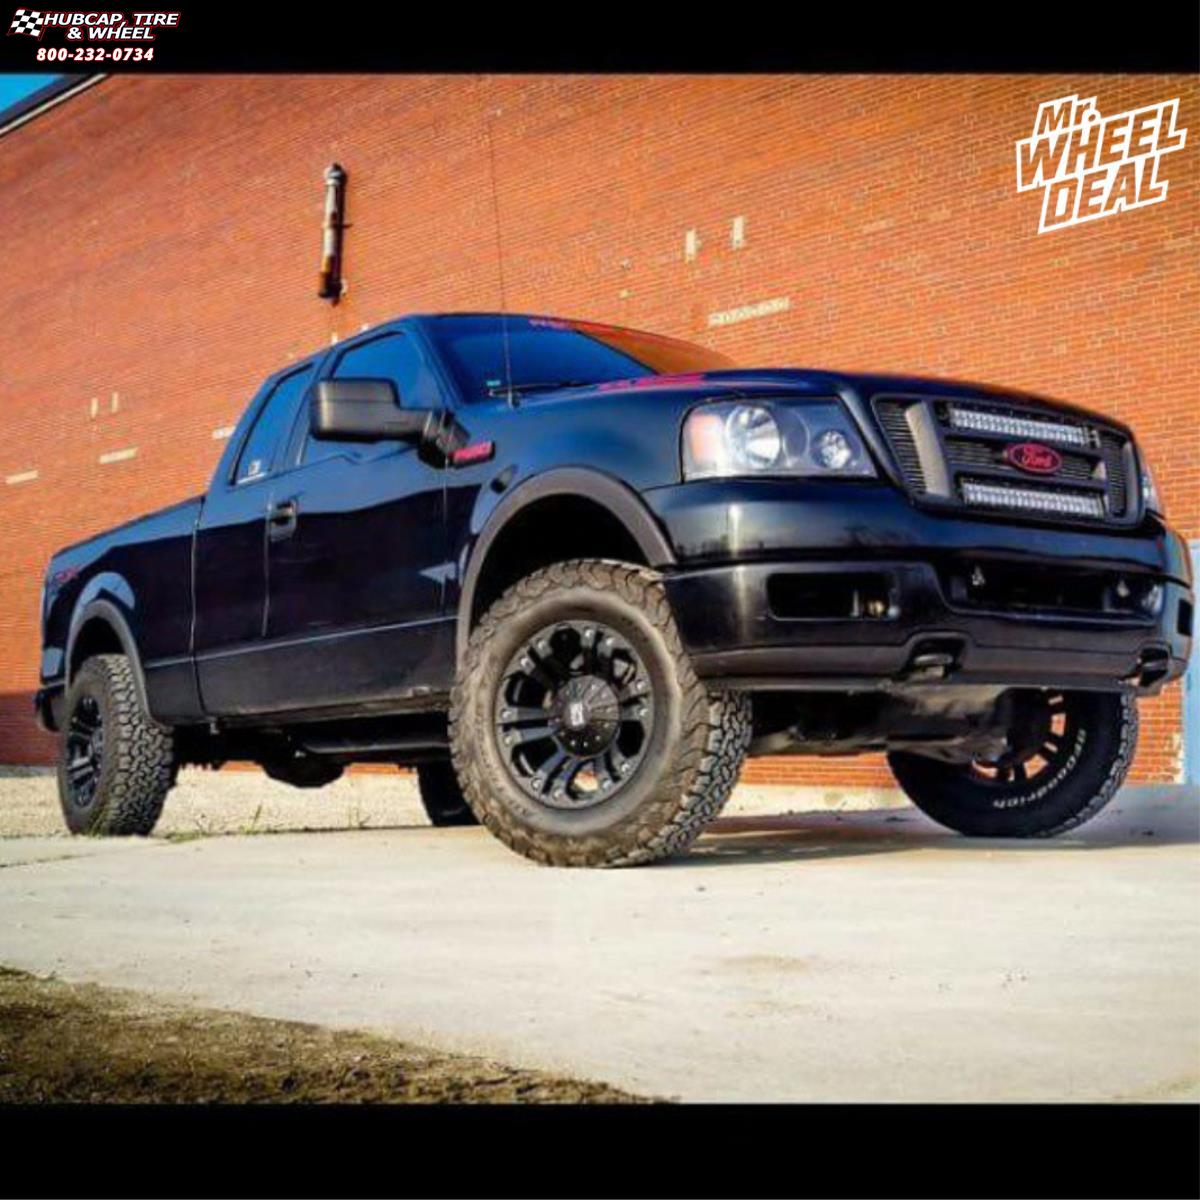 vehicle gallery/2005 ford f 150 xd series xd778 monster 18x9  Matte Black wheels and rims